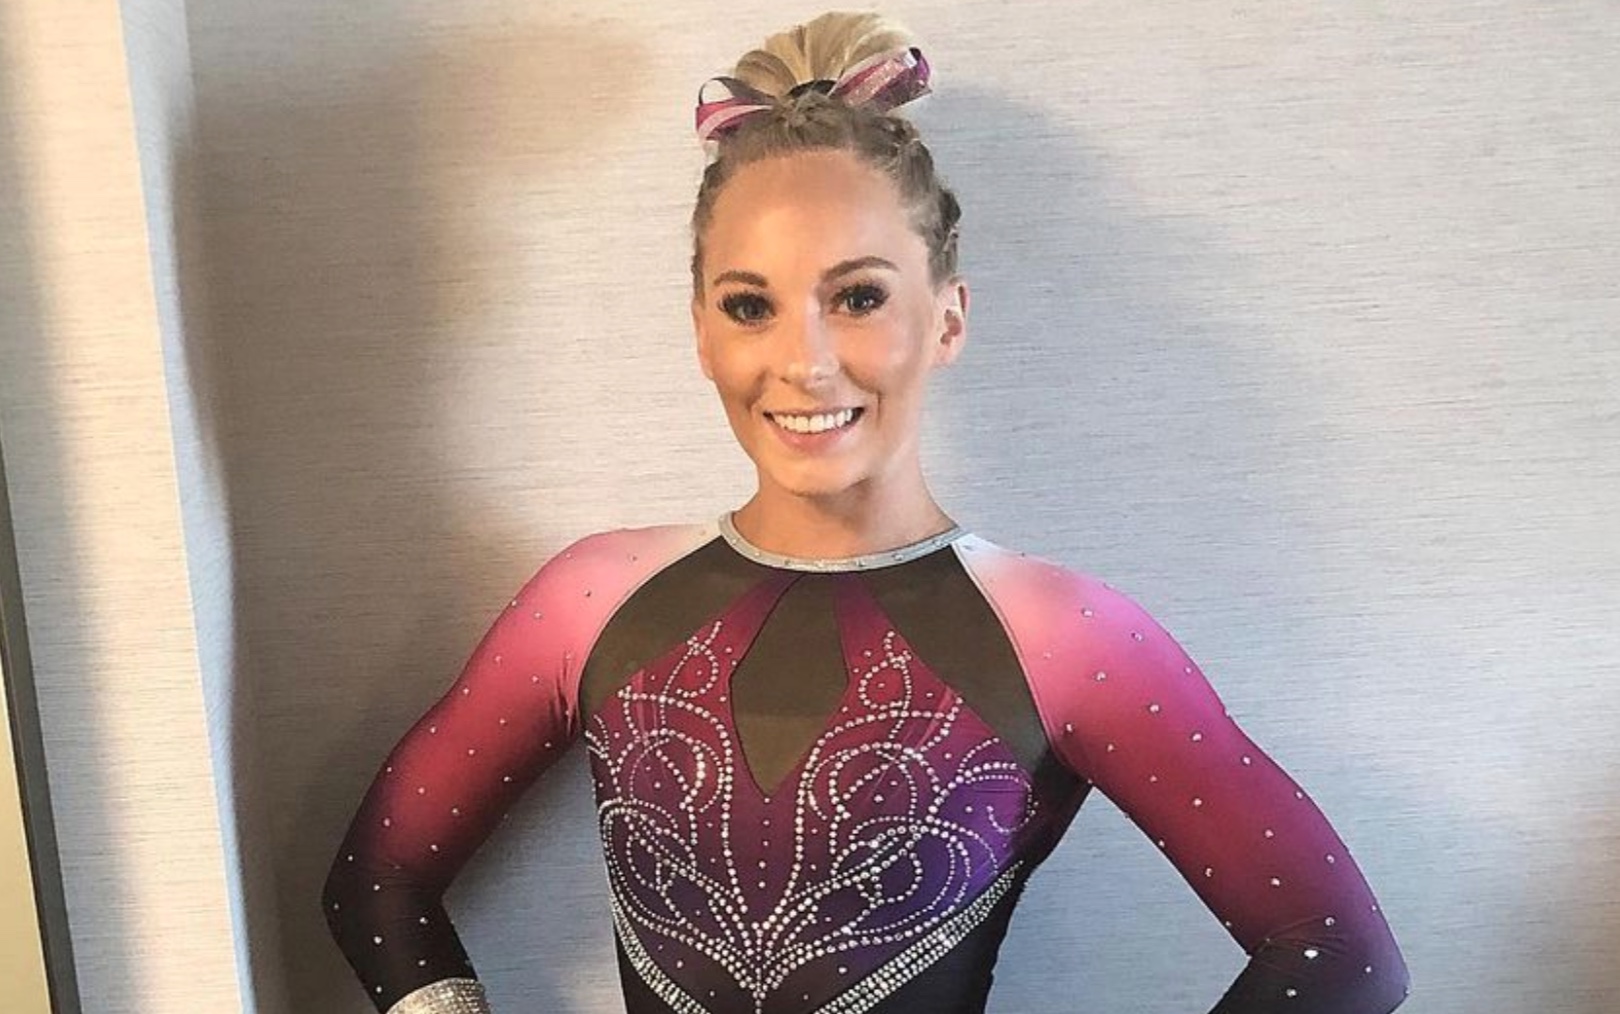 Utah Gymnast Fighting To Make Olympic Trials After Bout 